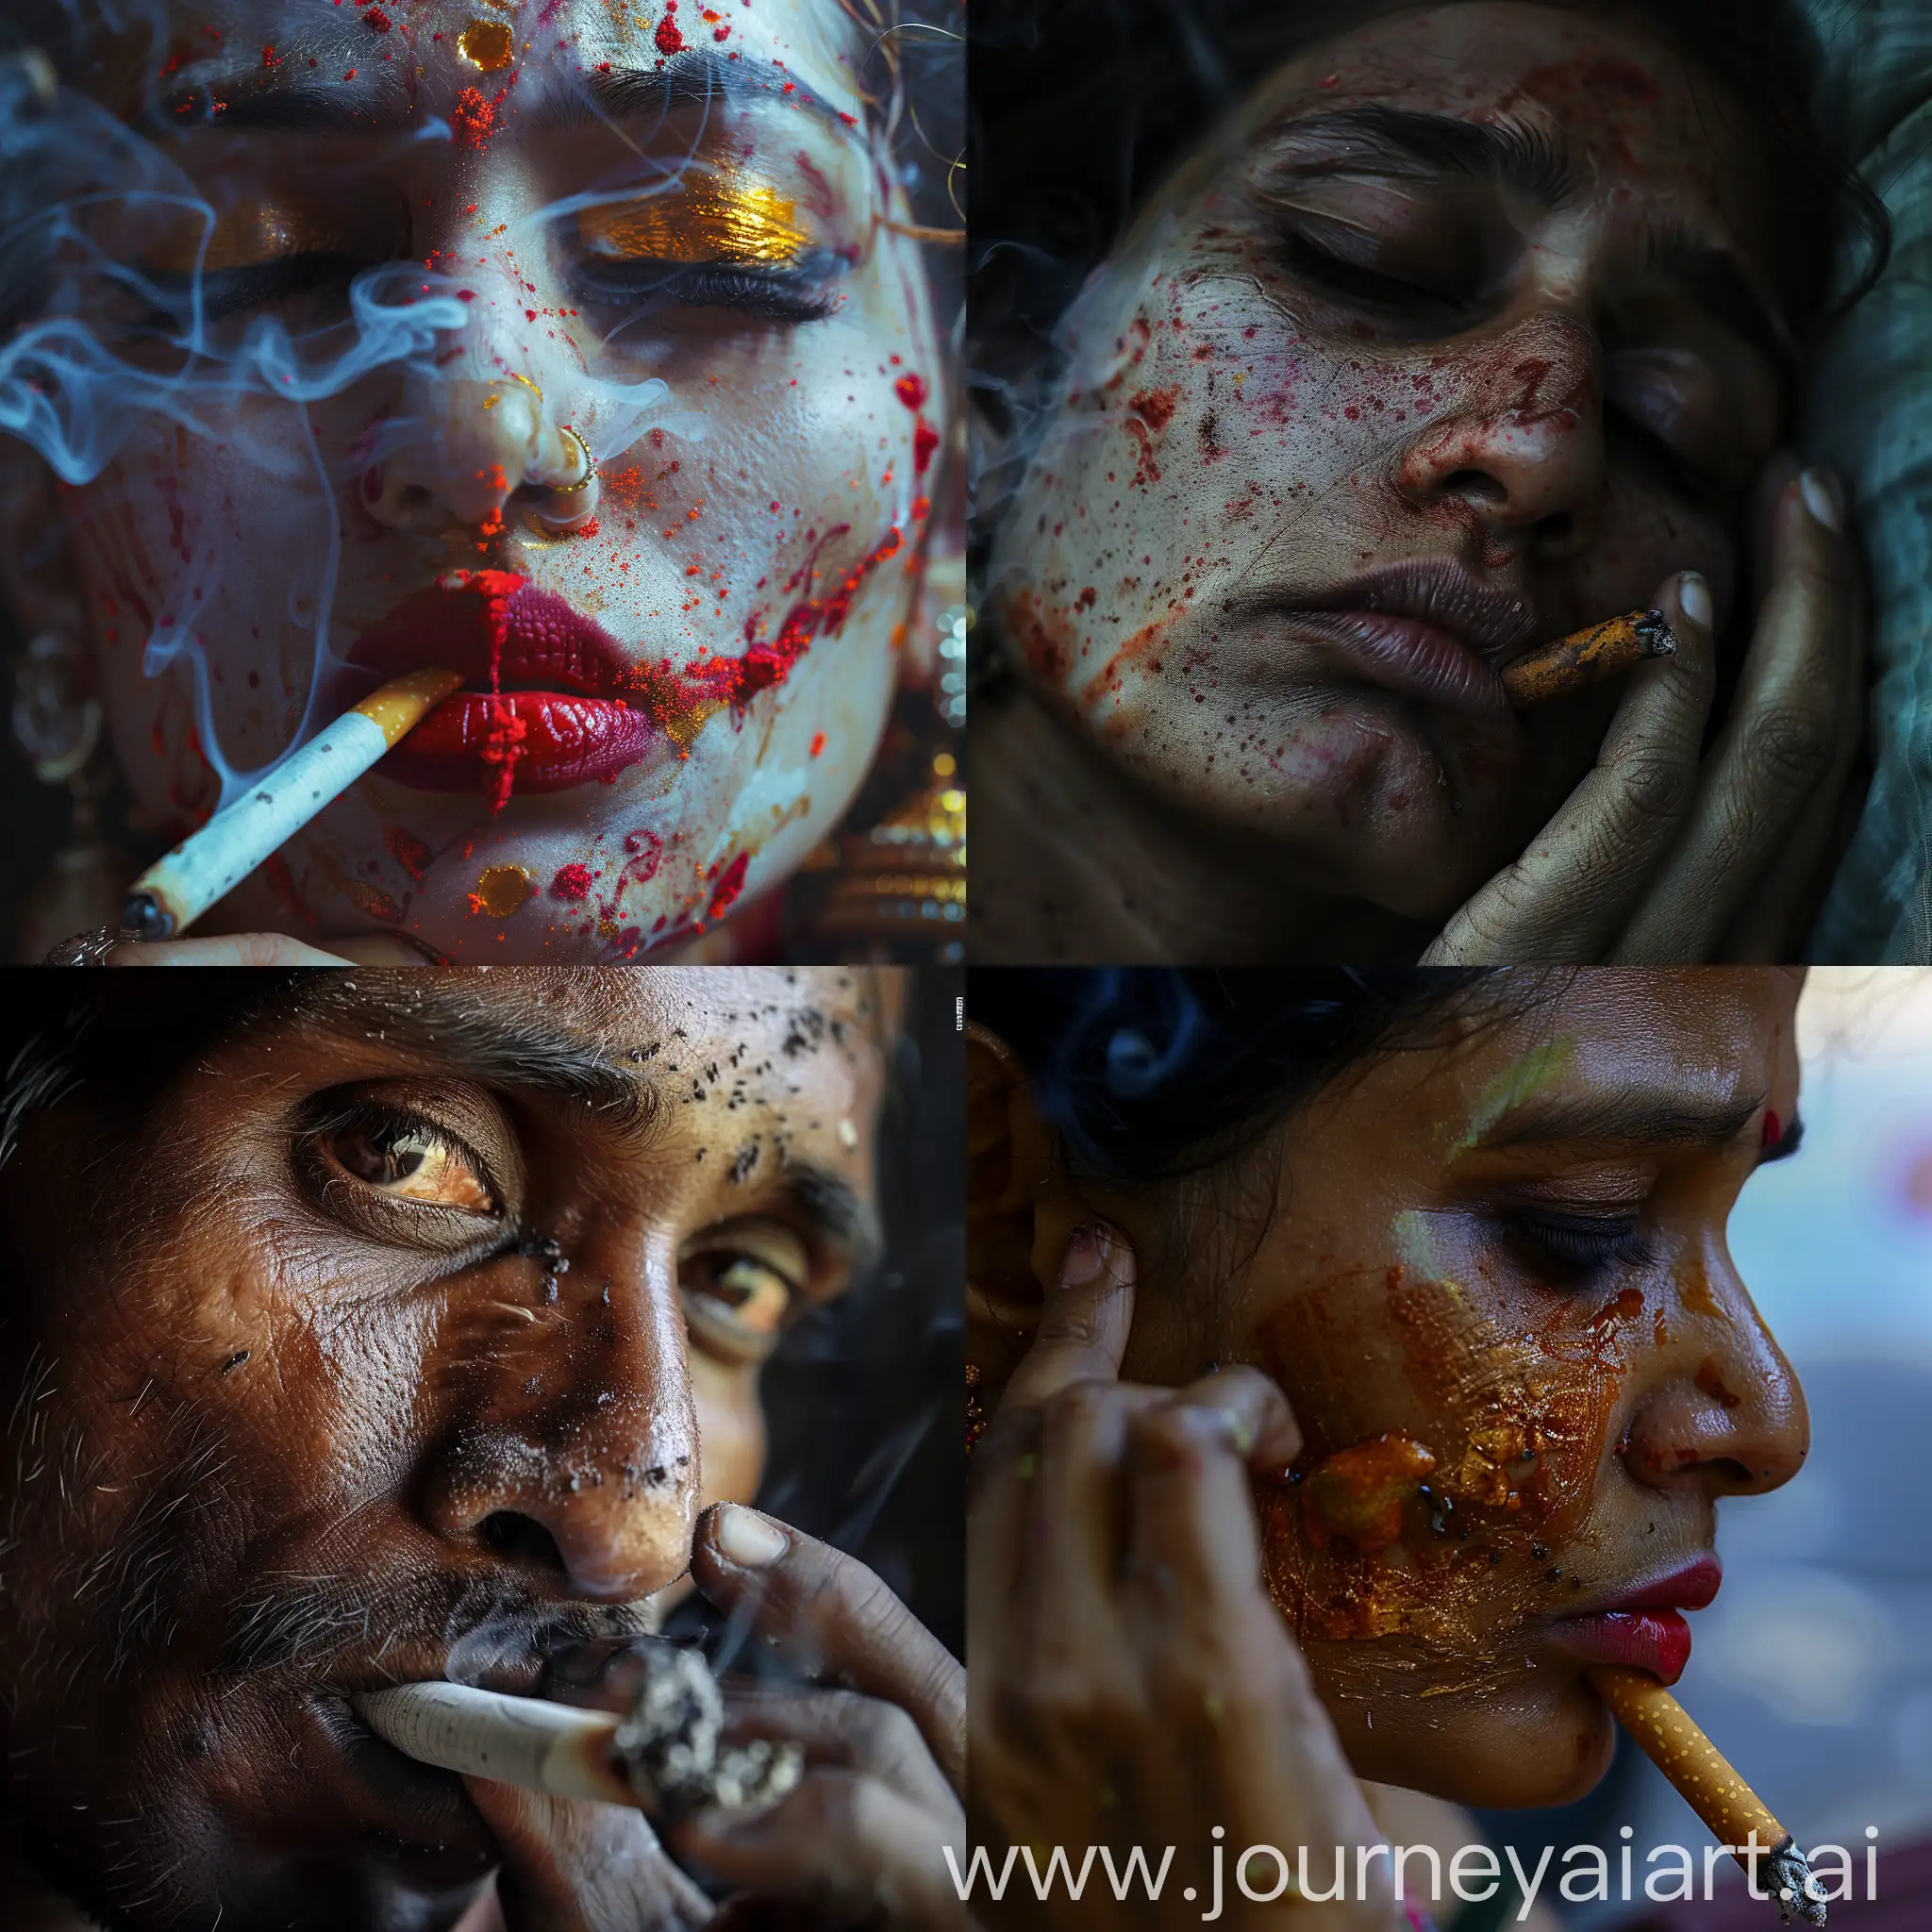 create image related Cancer is caused by addictions like mava / paan chewing and smoking.